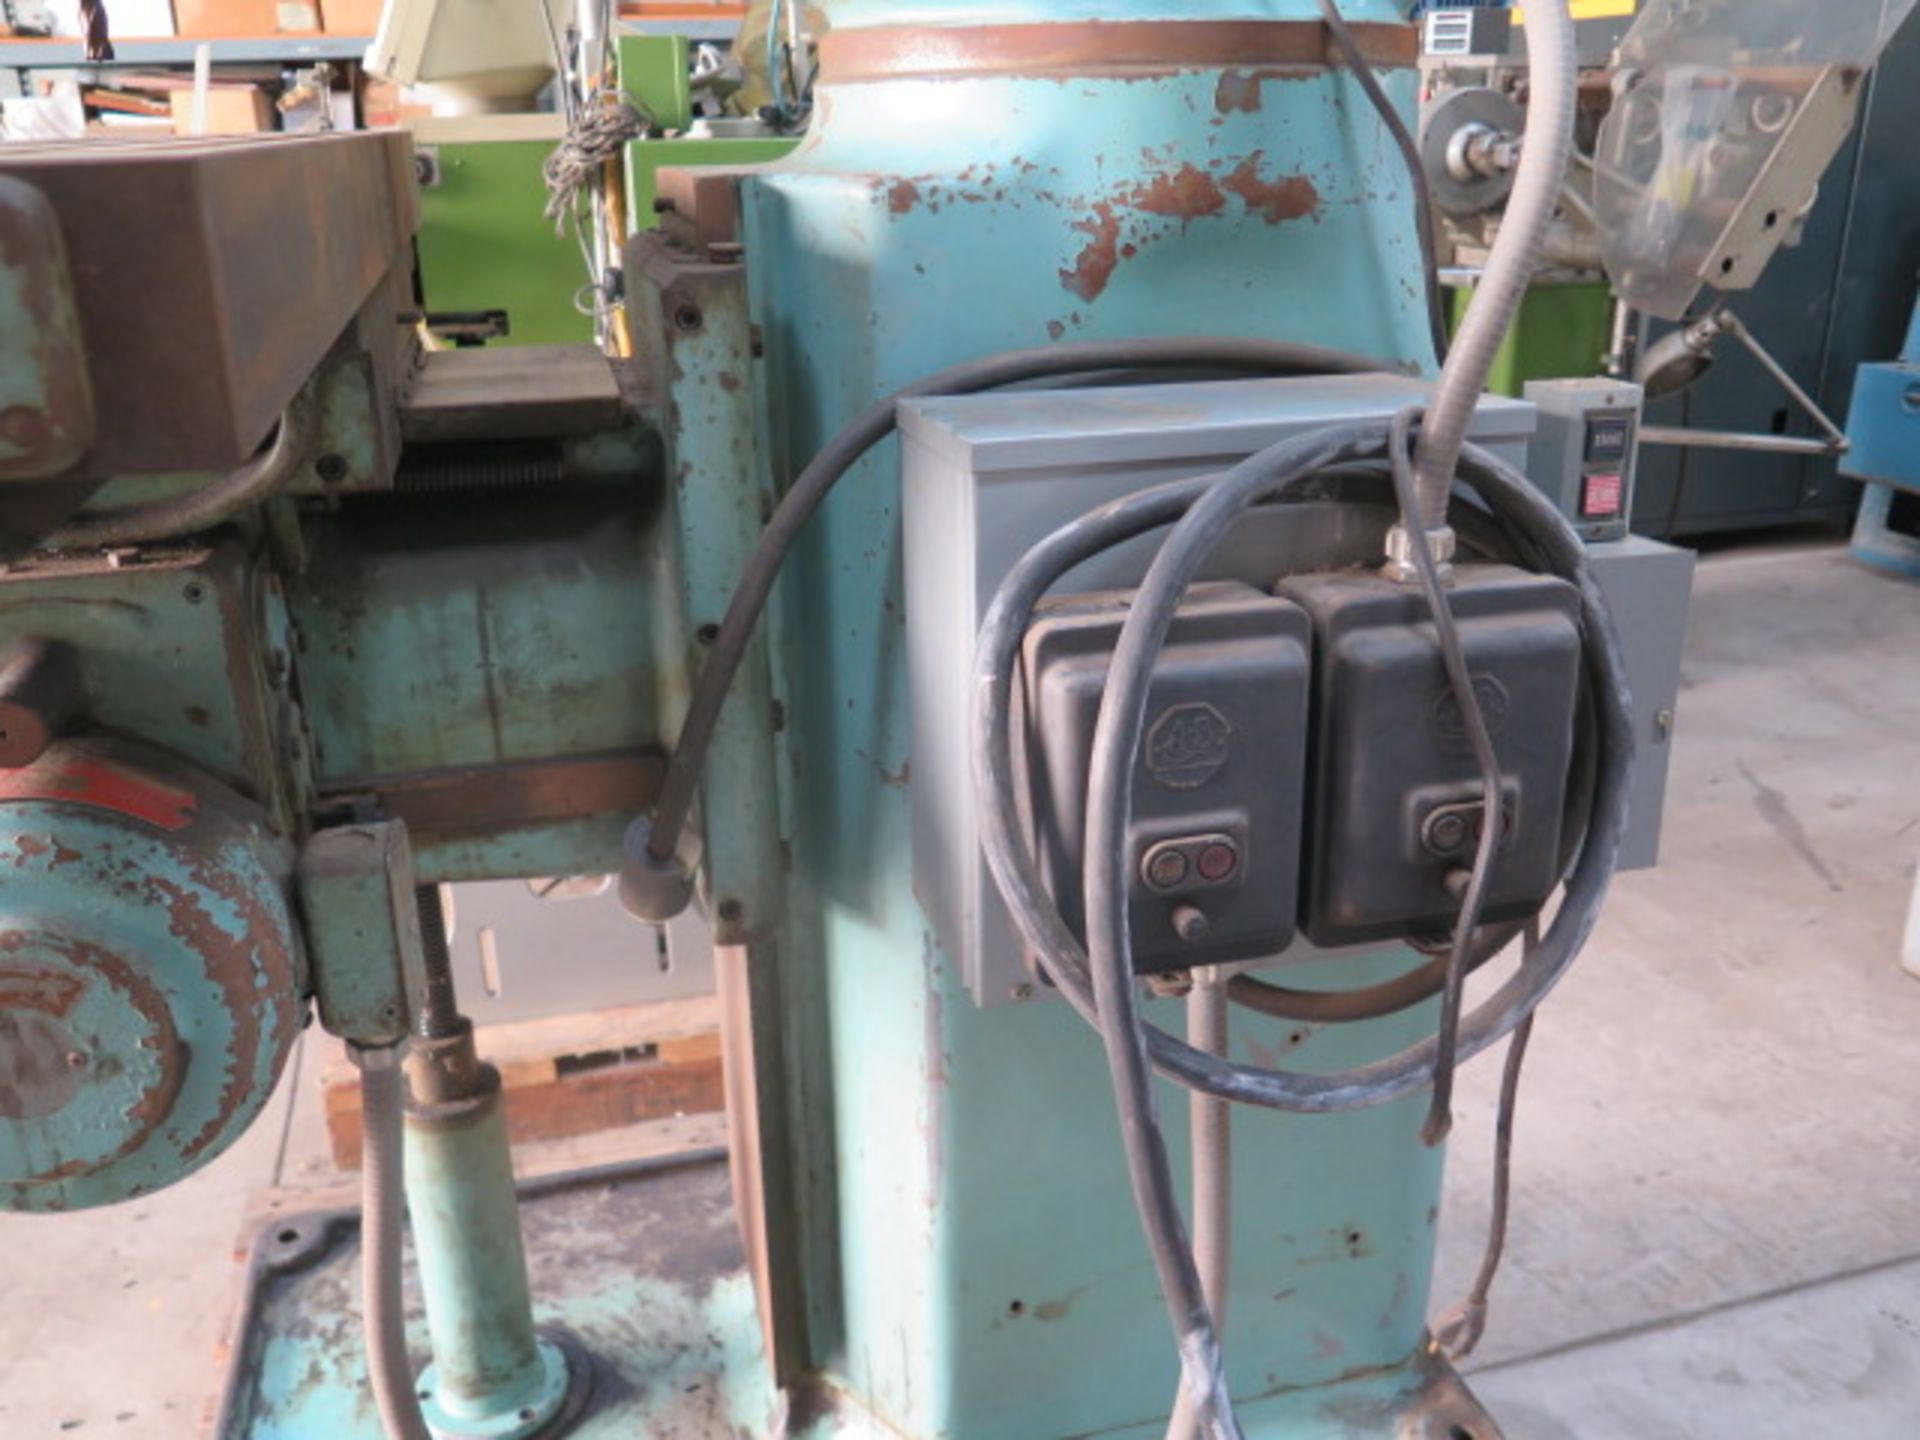 Tree 2UVR Vertical Mill w/ 1.5 Hp Motor, 60-3300 RPM, Power Feeds, 10 ½” x 42”, SOLD AS IS - Image 11 of 11